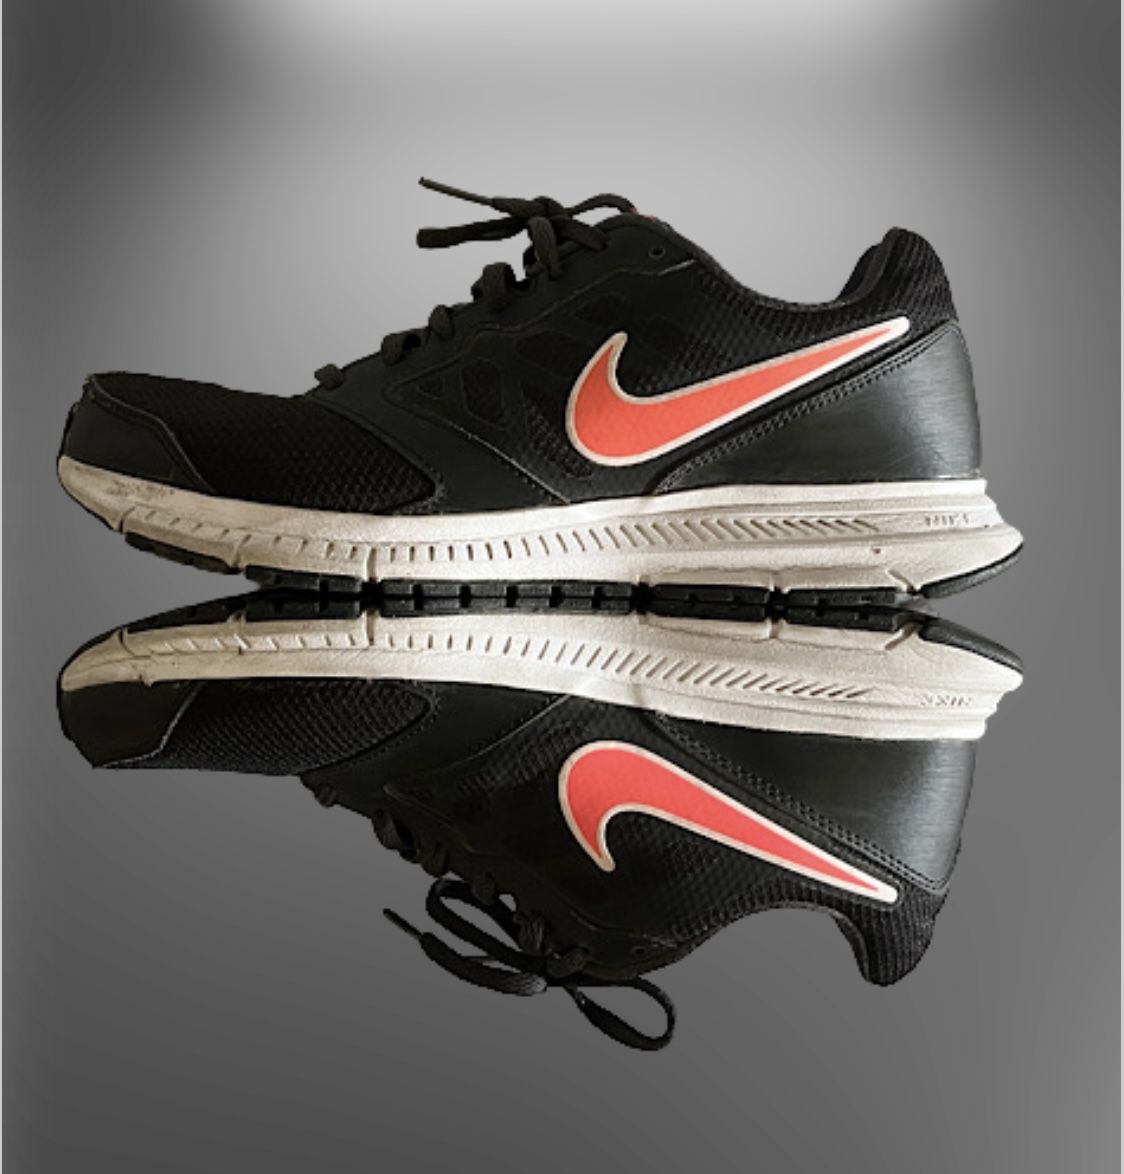 NIKE Downshifter 6 - 9.5 - Black / Pink - GUC Sale in Los Angeles, CA OfferUp